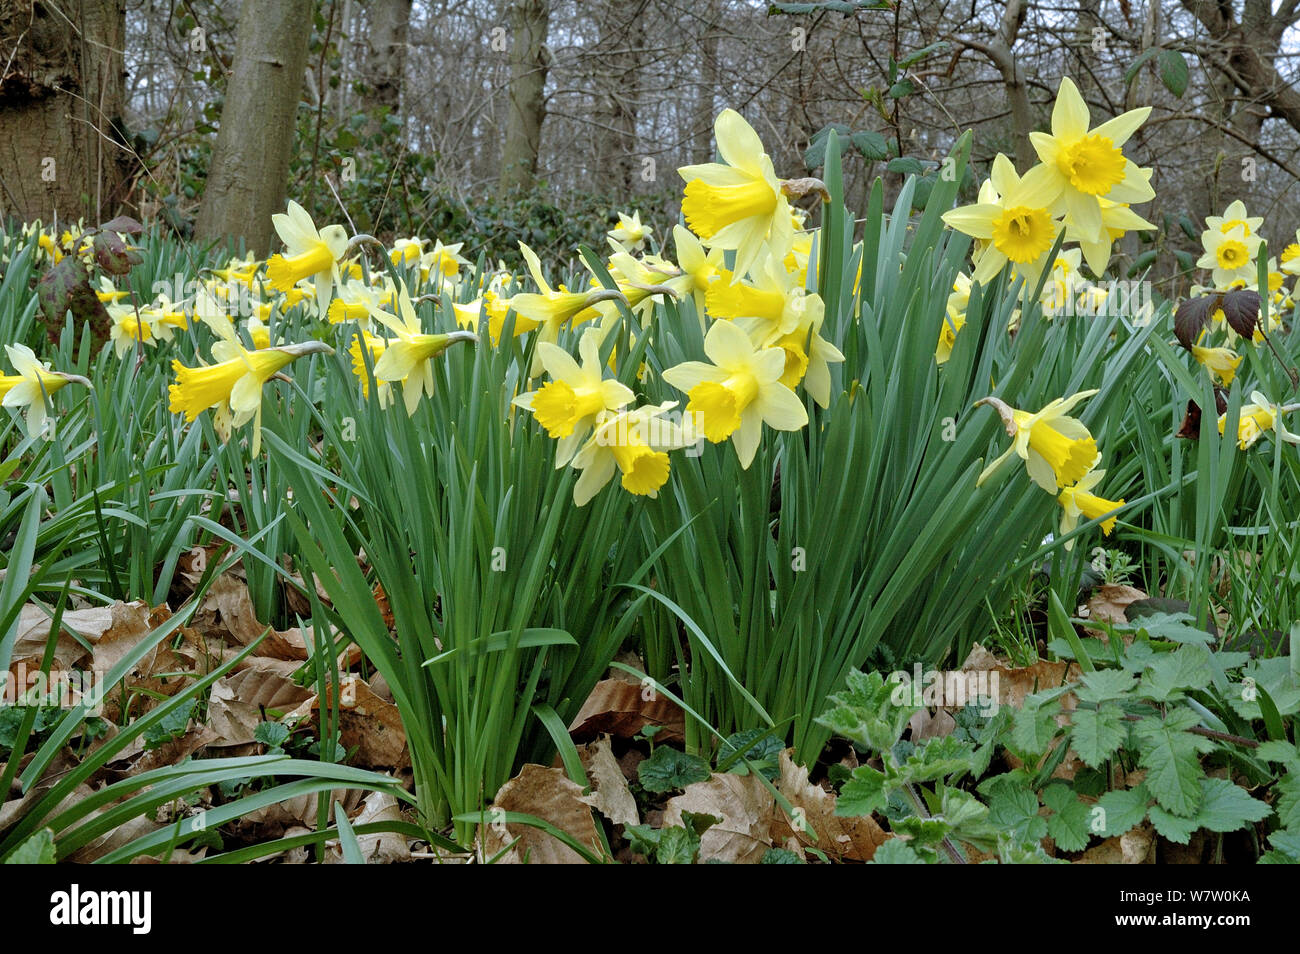 Wild Daffodils (Narcissus pseudonarcissus) growing in ancient woodland, Lesnes Abbey Wood, London Borough of Bexley, England, UK, March. Stock Photo